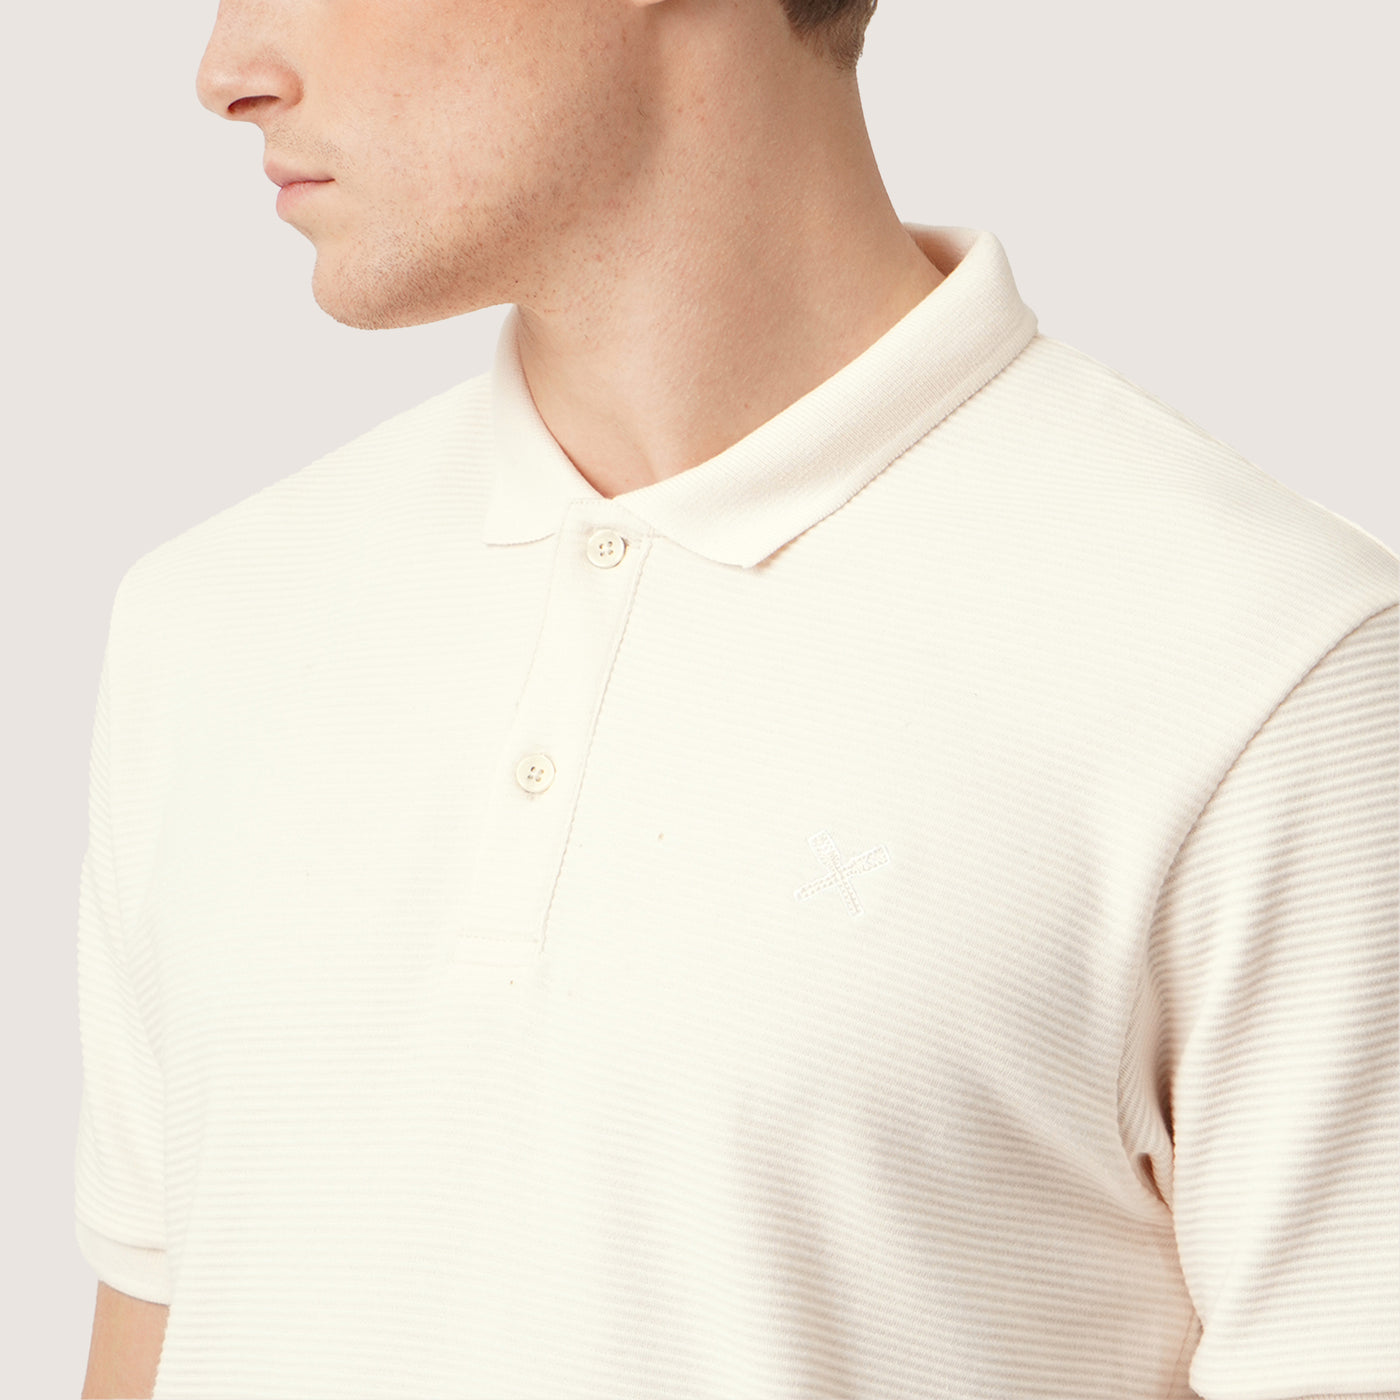 Regular Fit Polo in Textured Knit Fabric